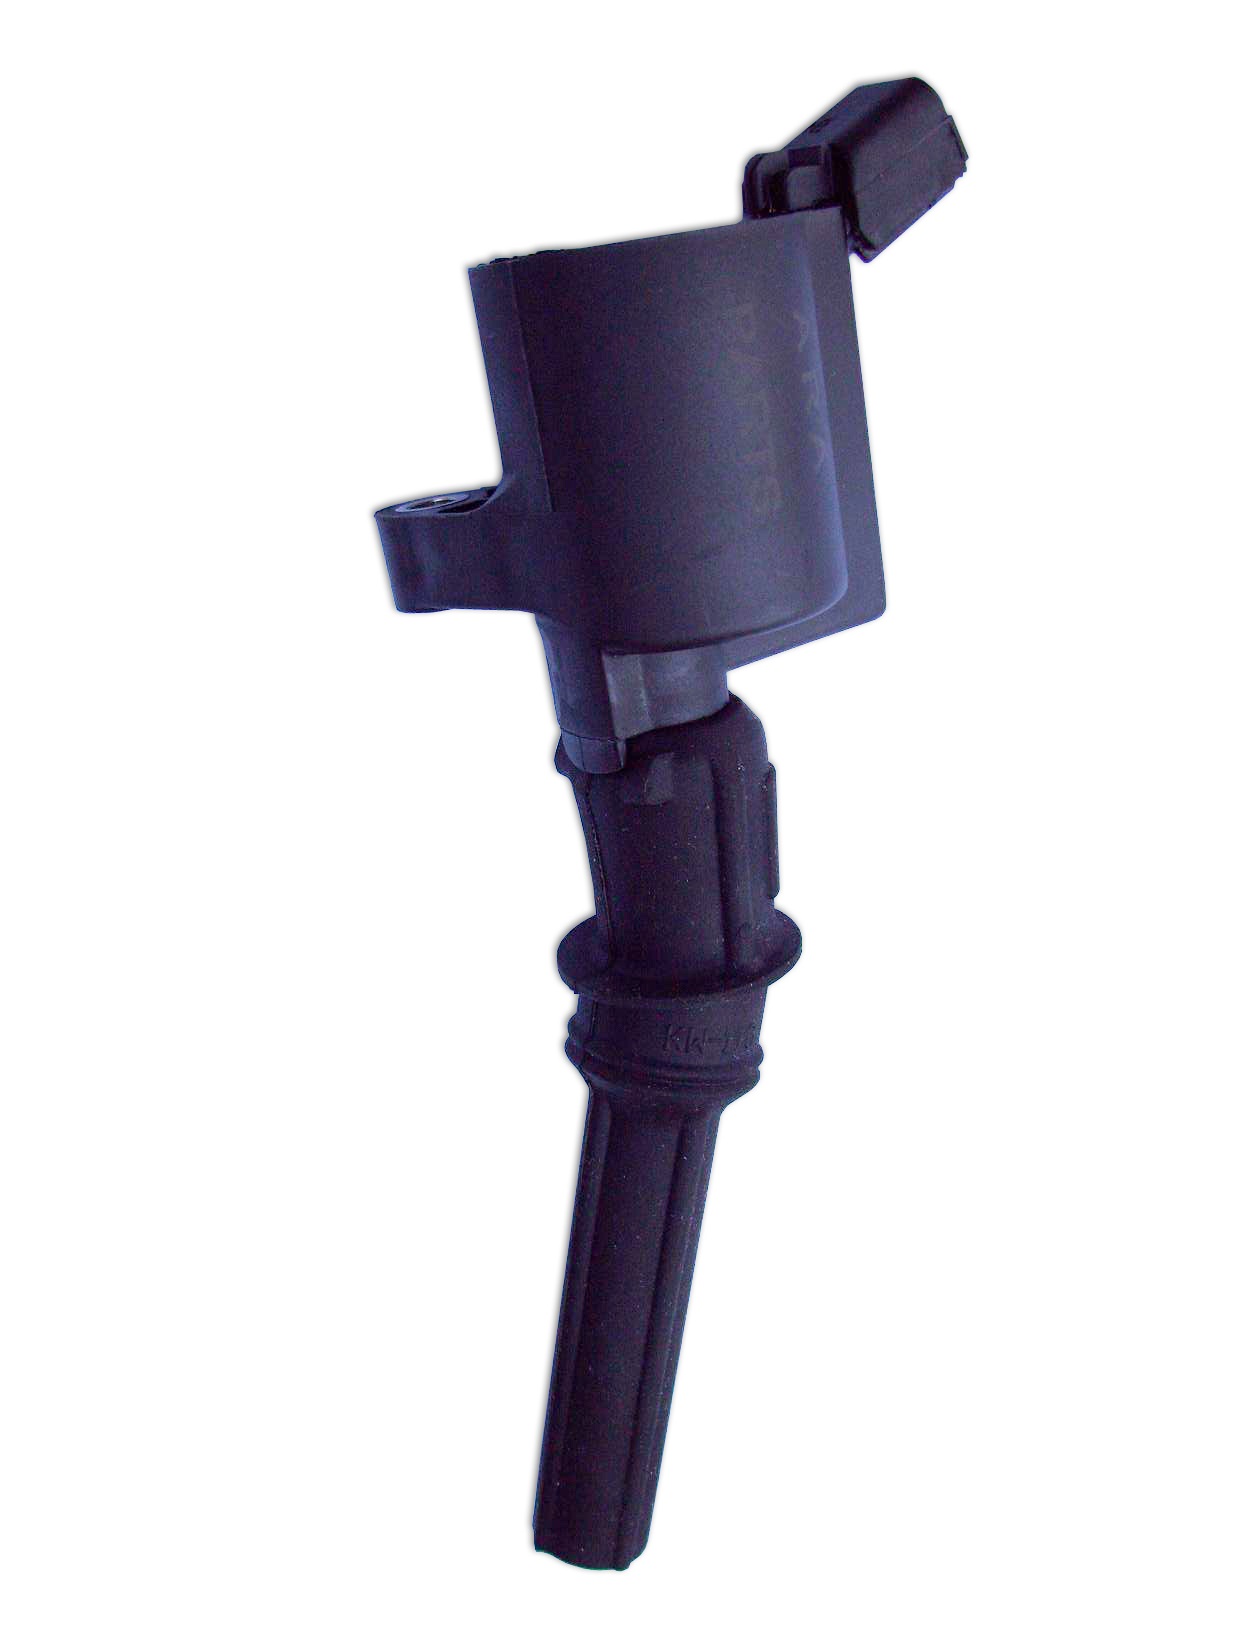 This ignition coil (DG508) fits the 2007 F-150 with the 4.6L V8